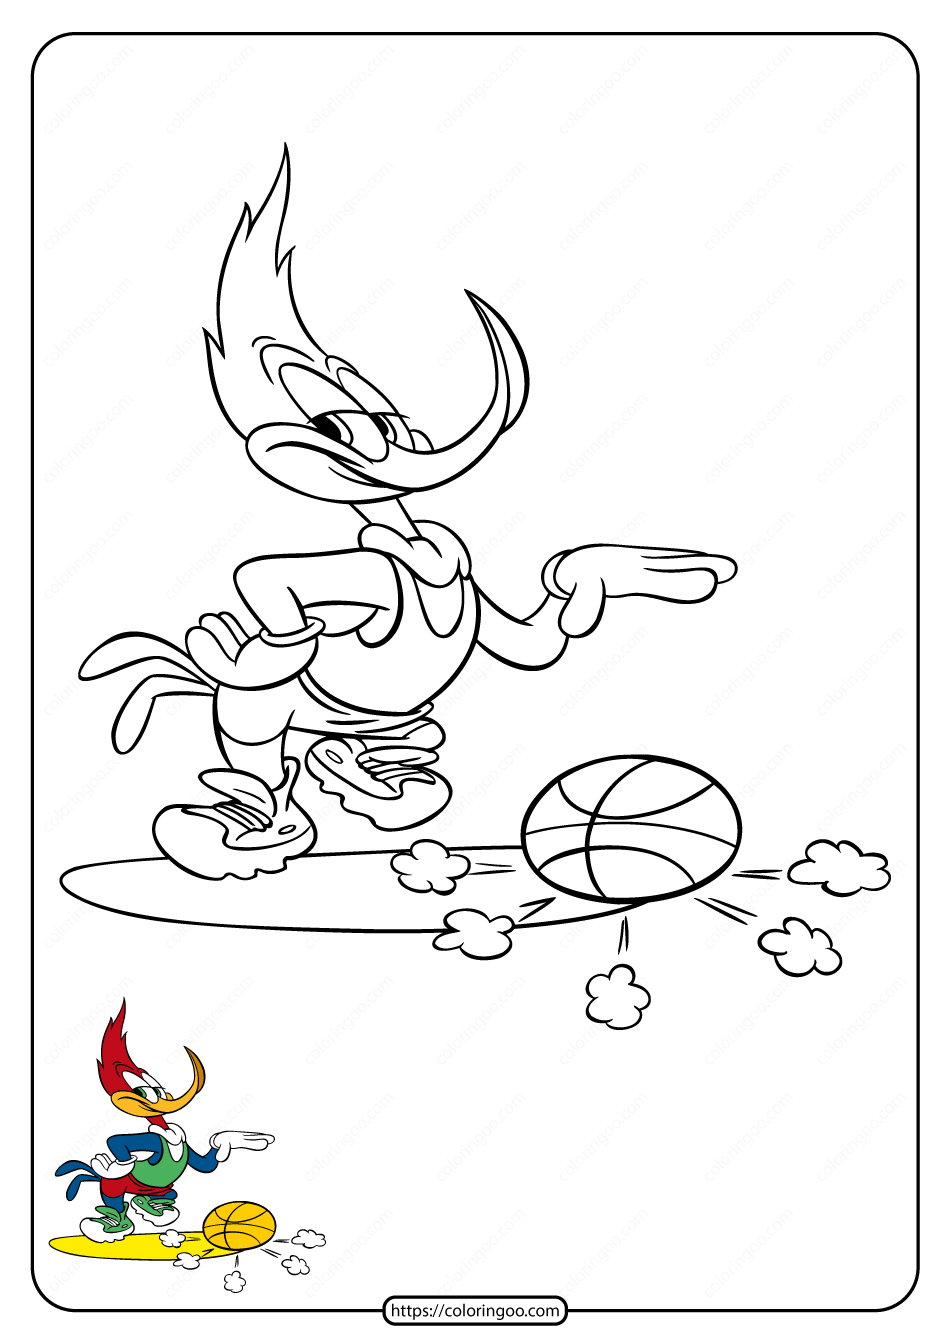 Woody Woodpecker Playing Basketball Coloring Page